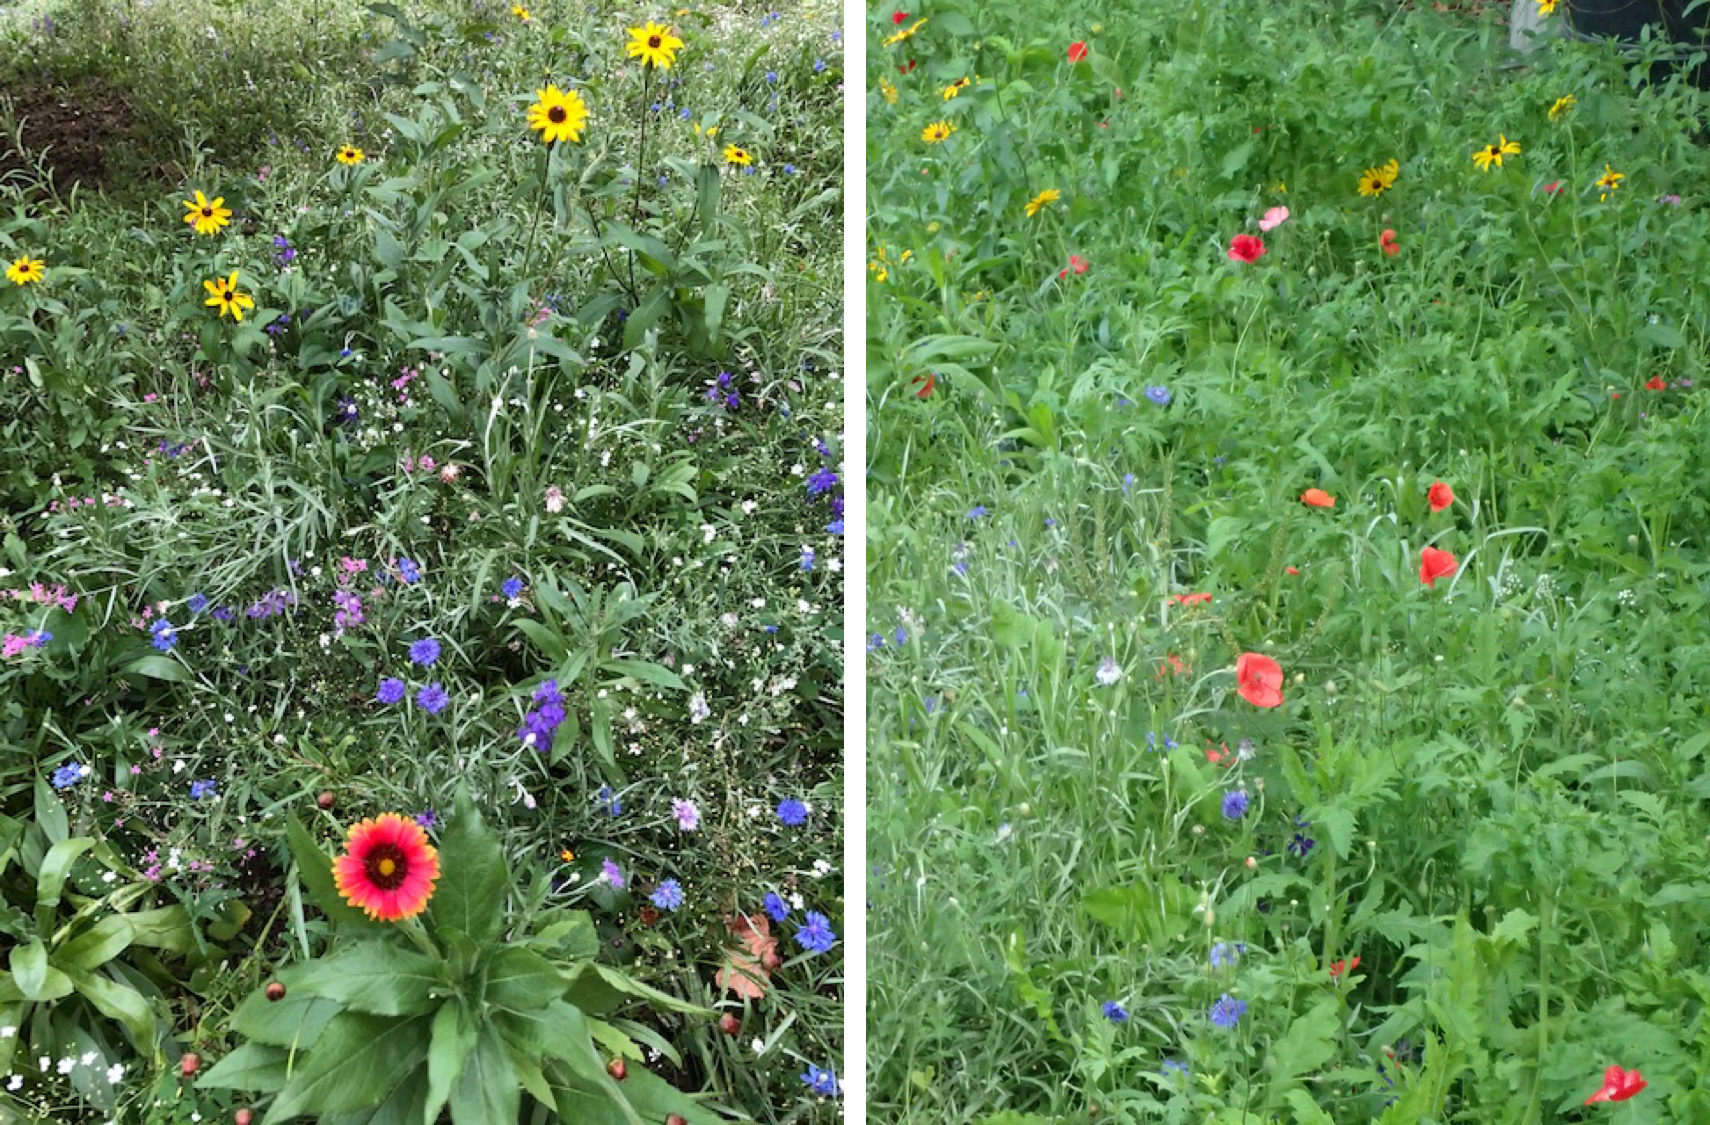 Two side by side photos of a wildflower meadow, with bright red and yellow flowers